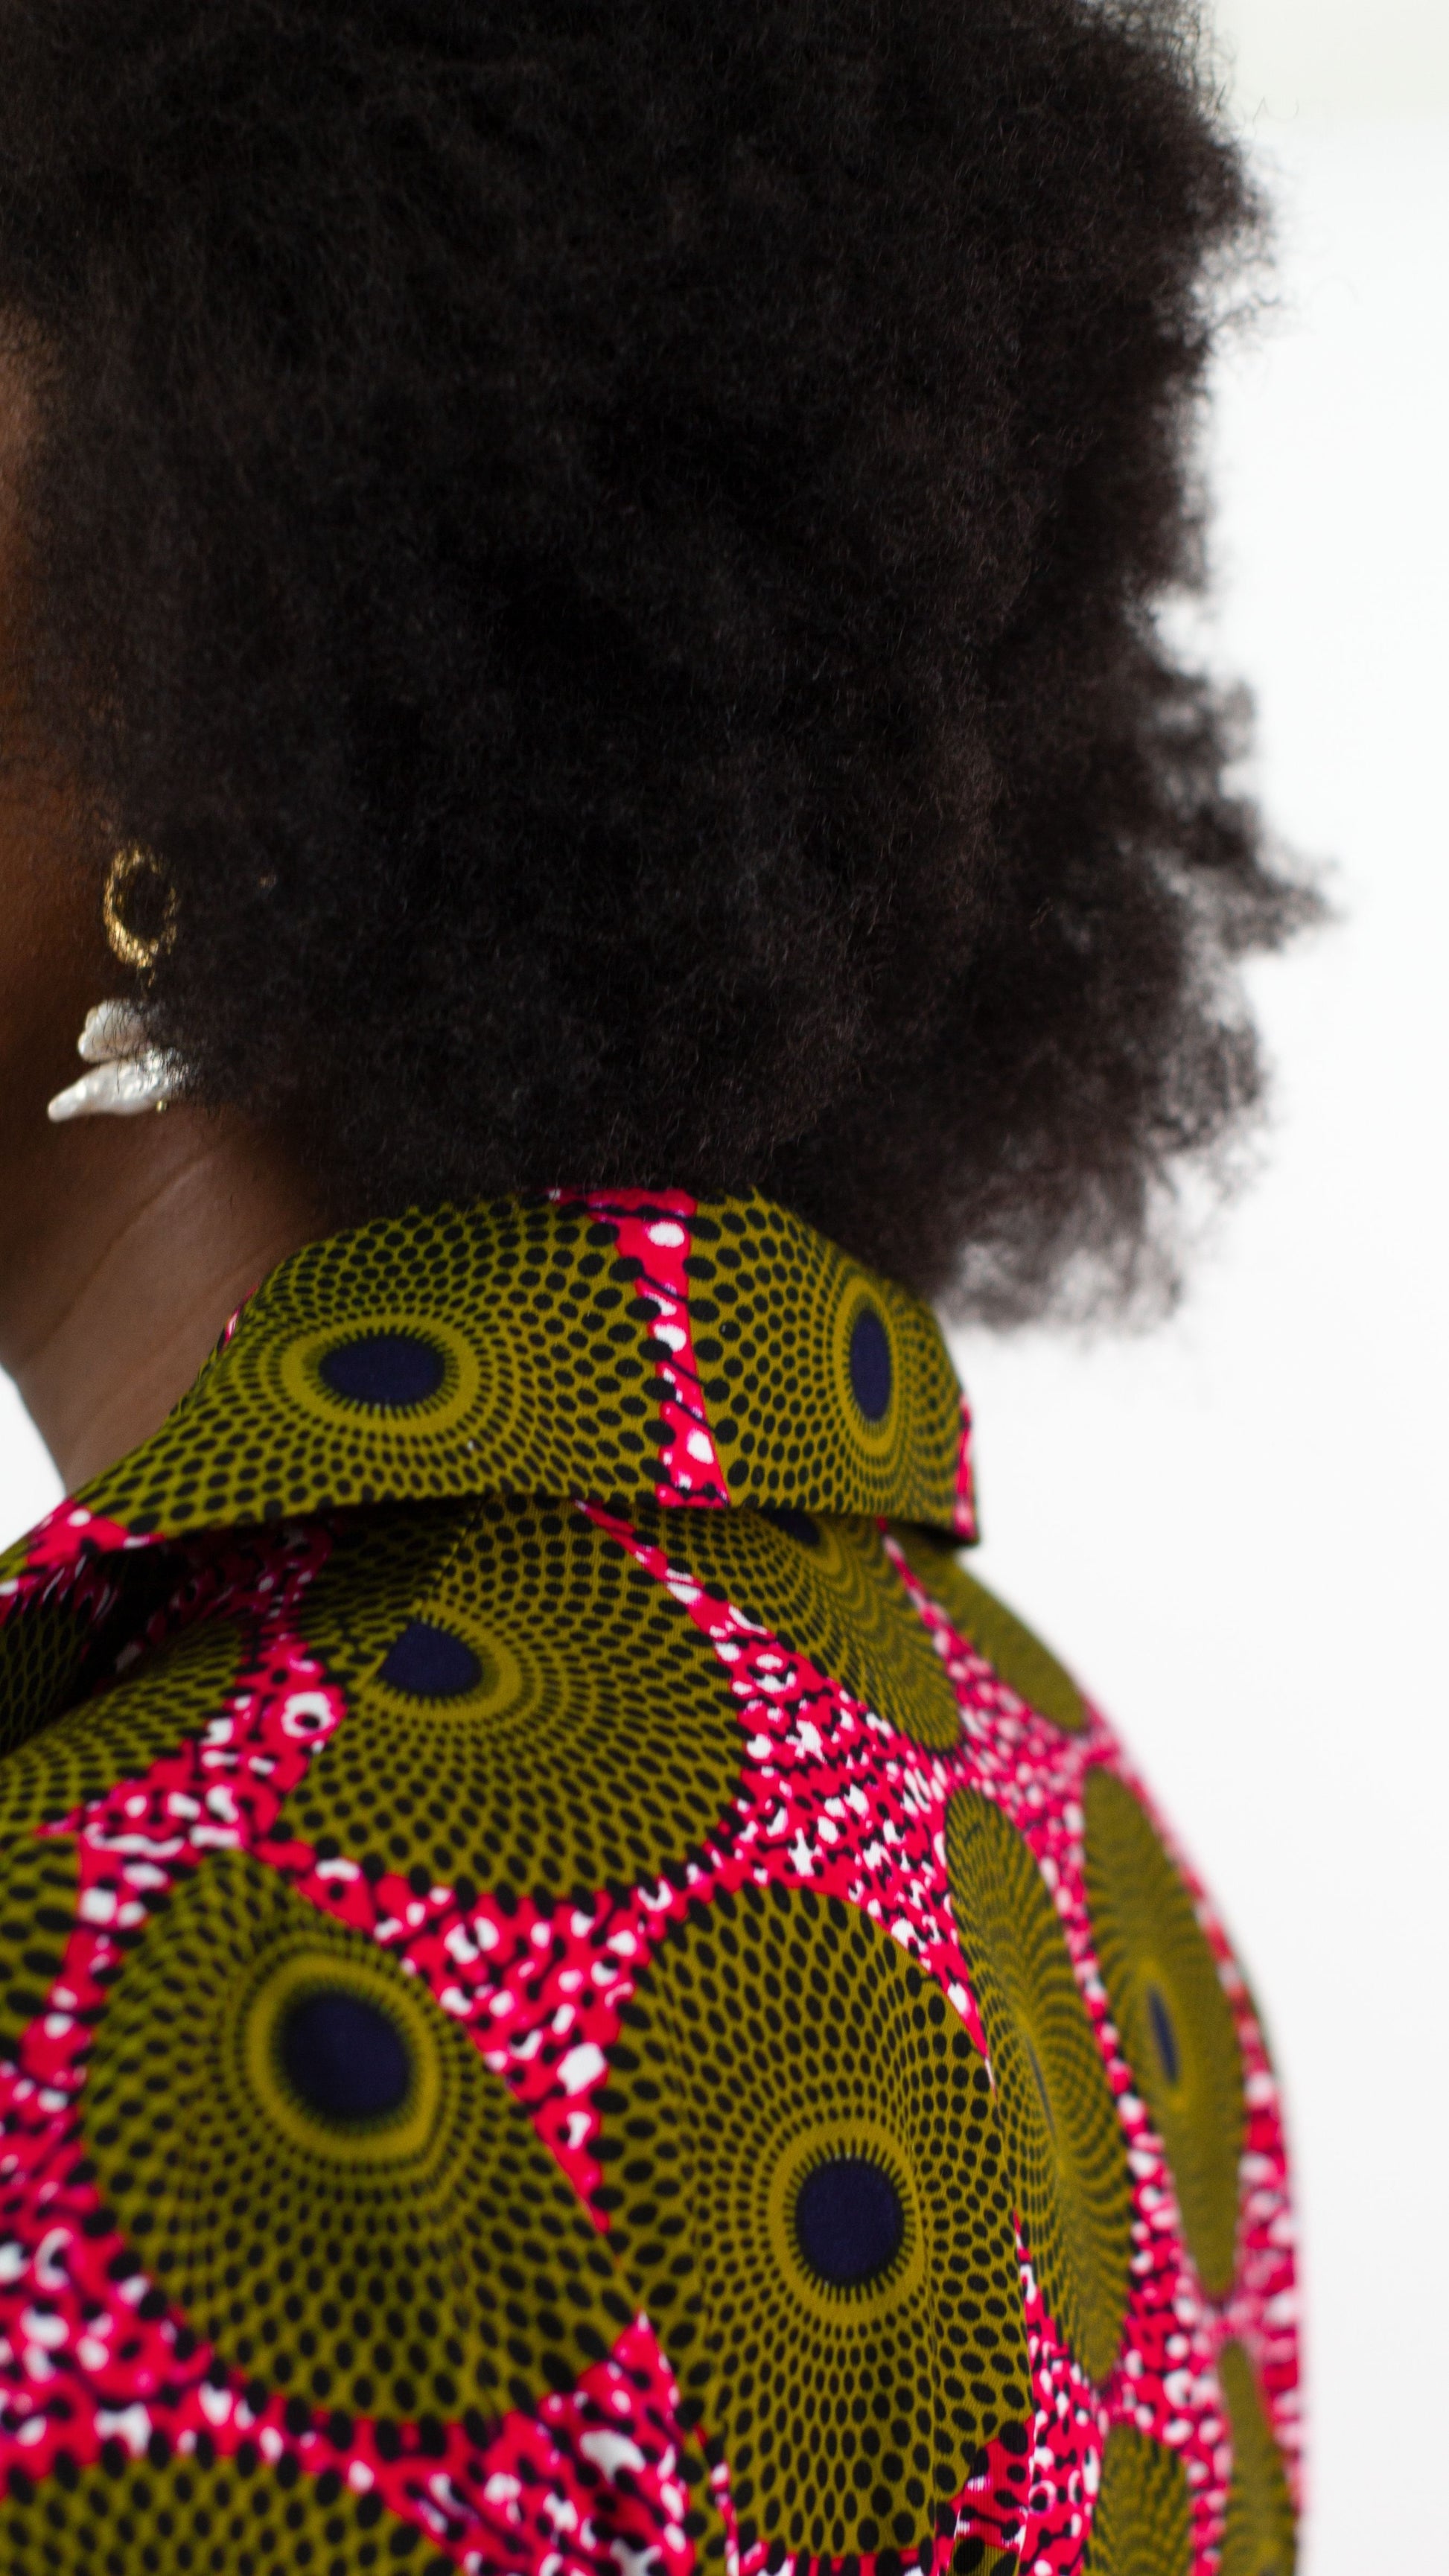 A close-up view highlighting the intricate elements of the 'Ripple Effect' print on the wrap dress, with a focus on the neck part featuring a high-neck collar. 